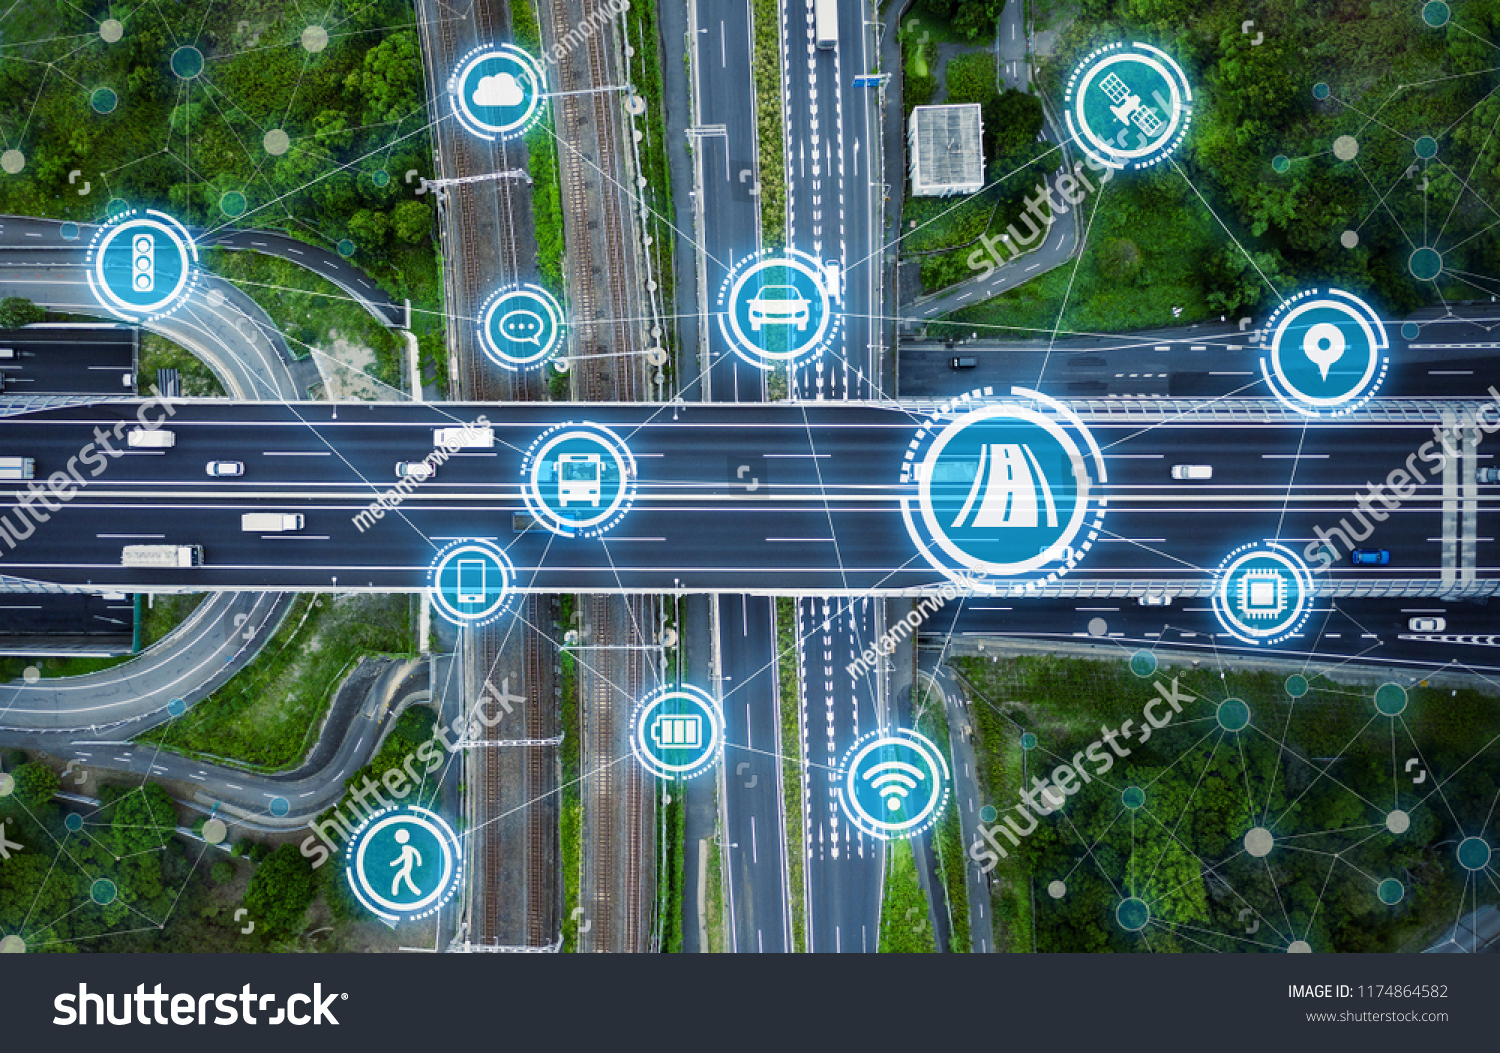 Social infrastructure and communication technology concept. IoT(Internet of Things). Autonomous transportation.  #1174864582